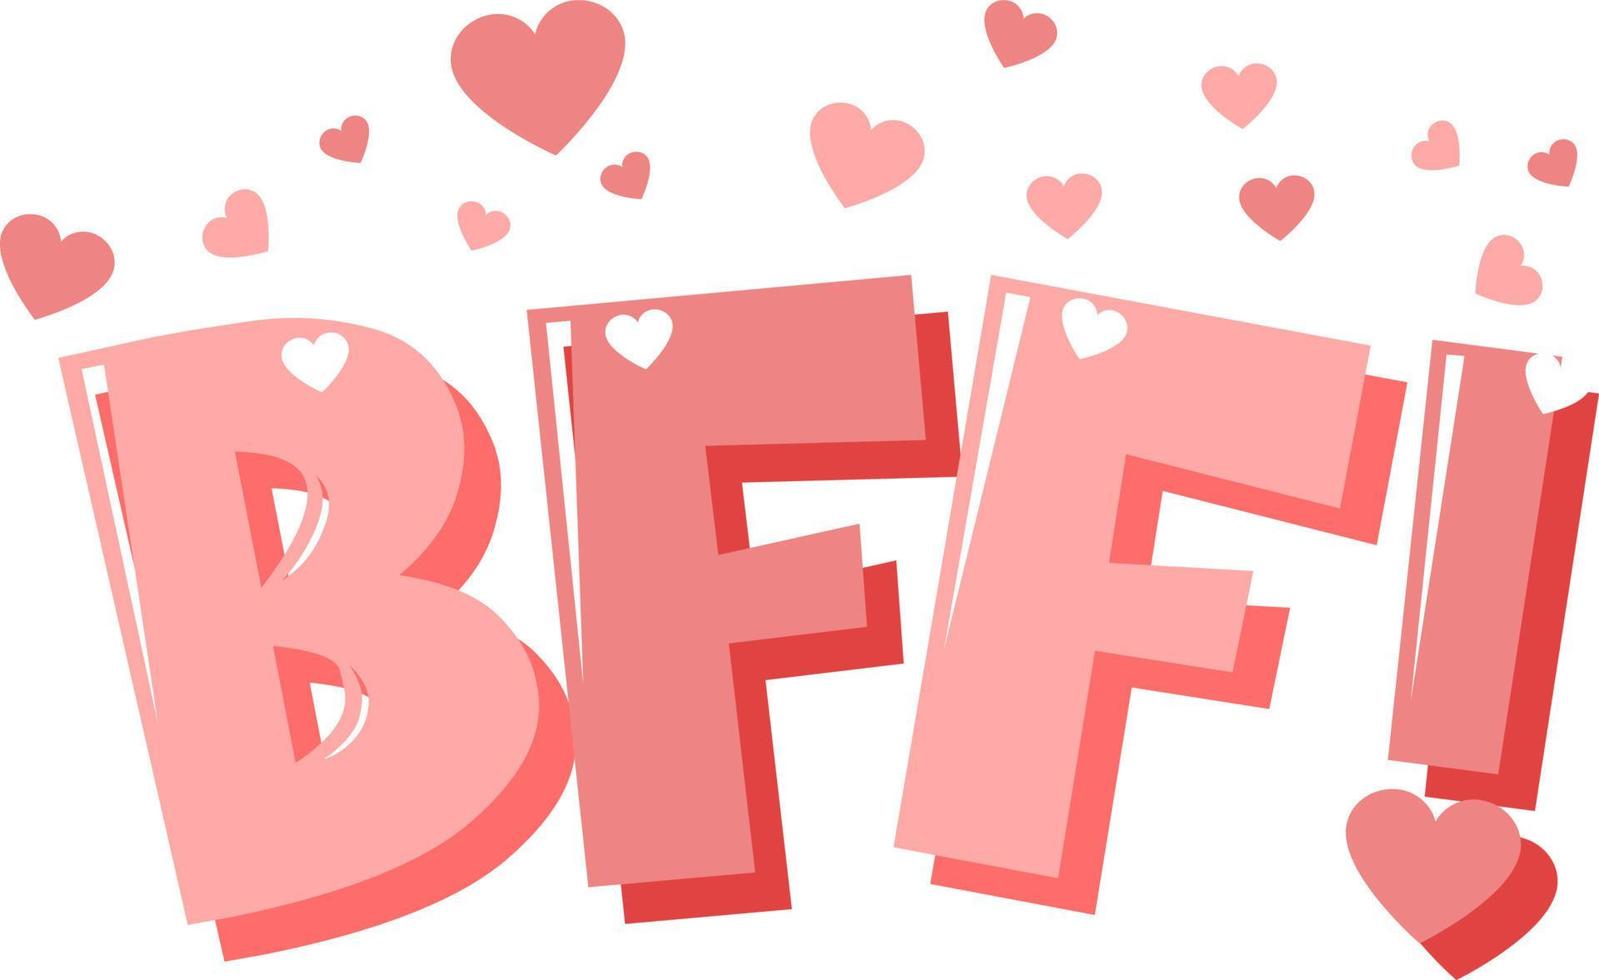 BFF or best friend forever lettering on white background vector